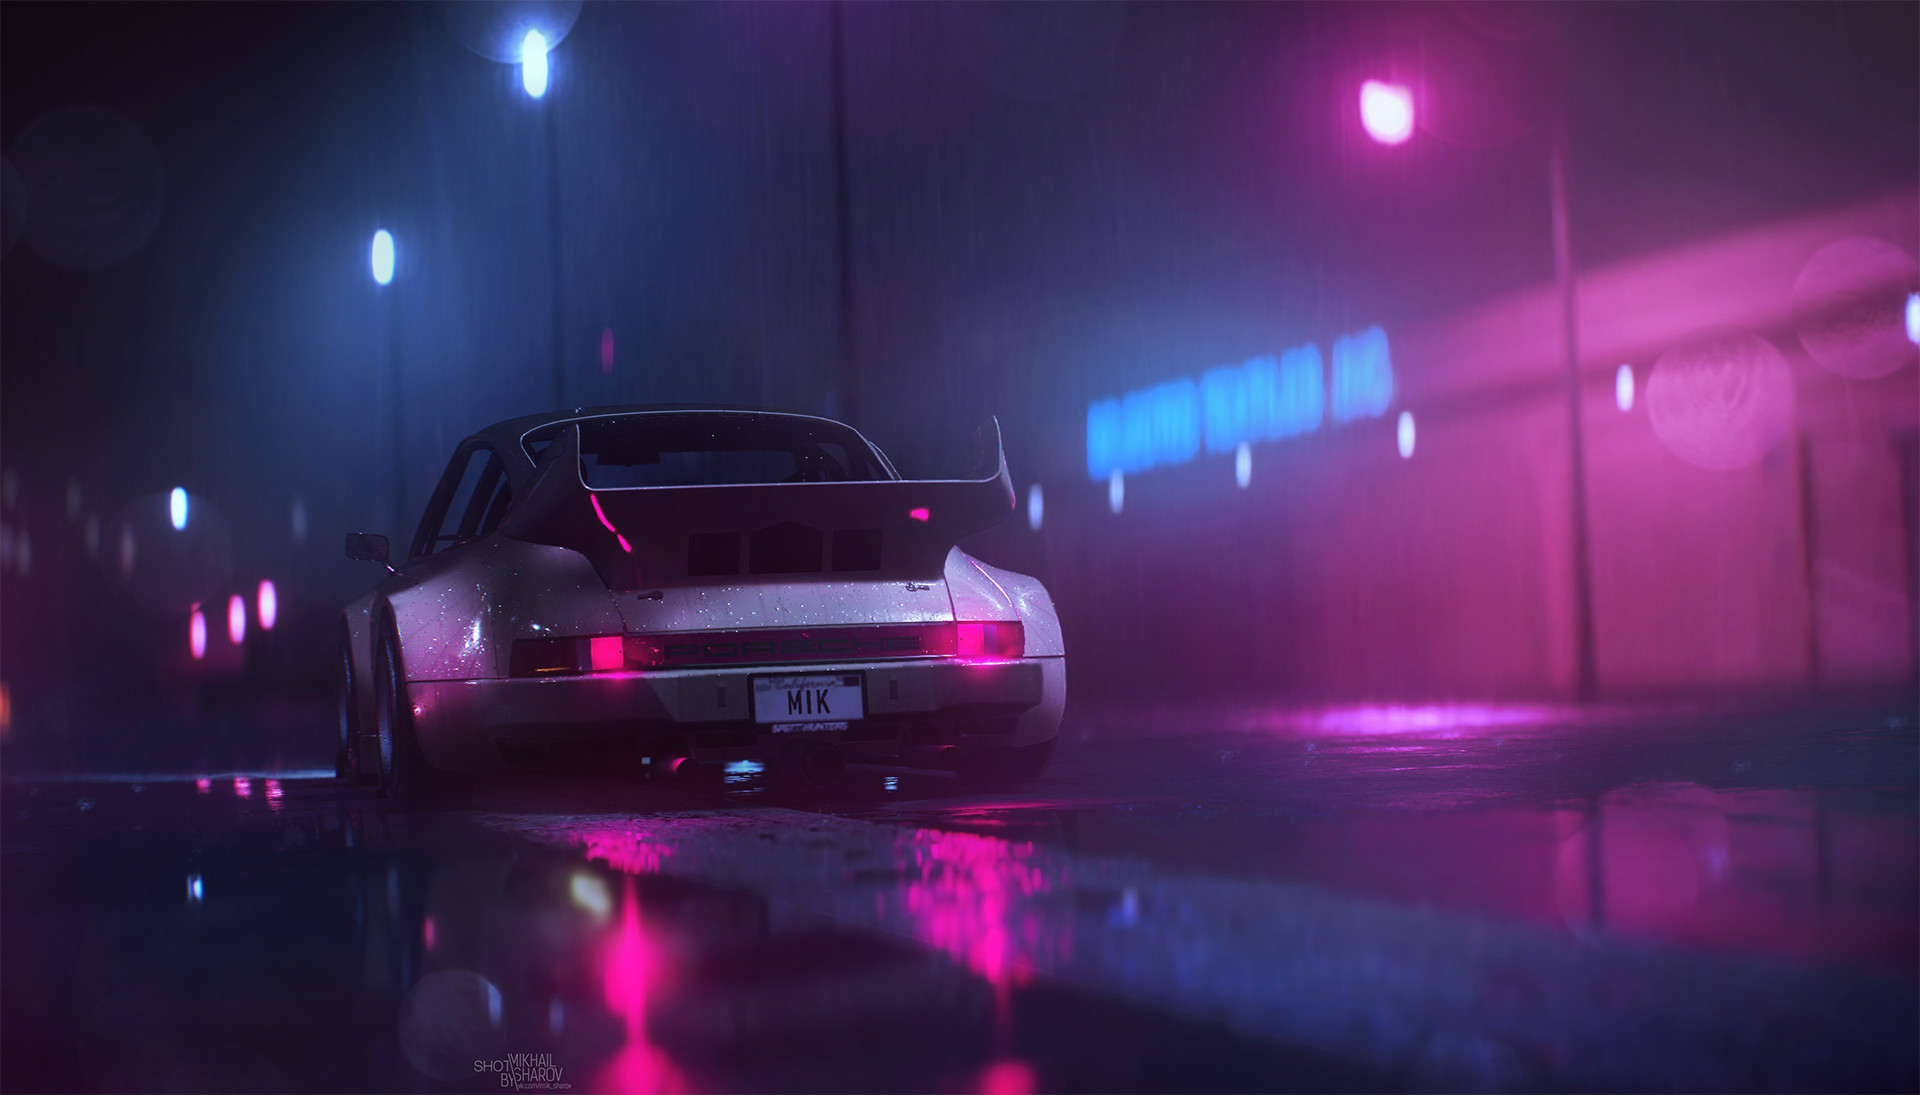 1920x1095 Some of the best new Retrowave/Synthwave wallpapers and artwork